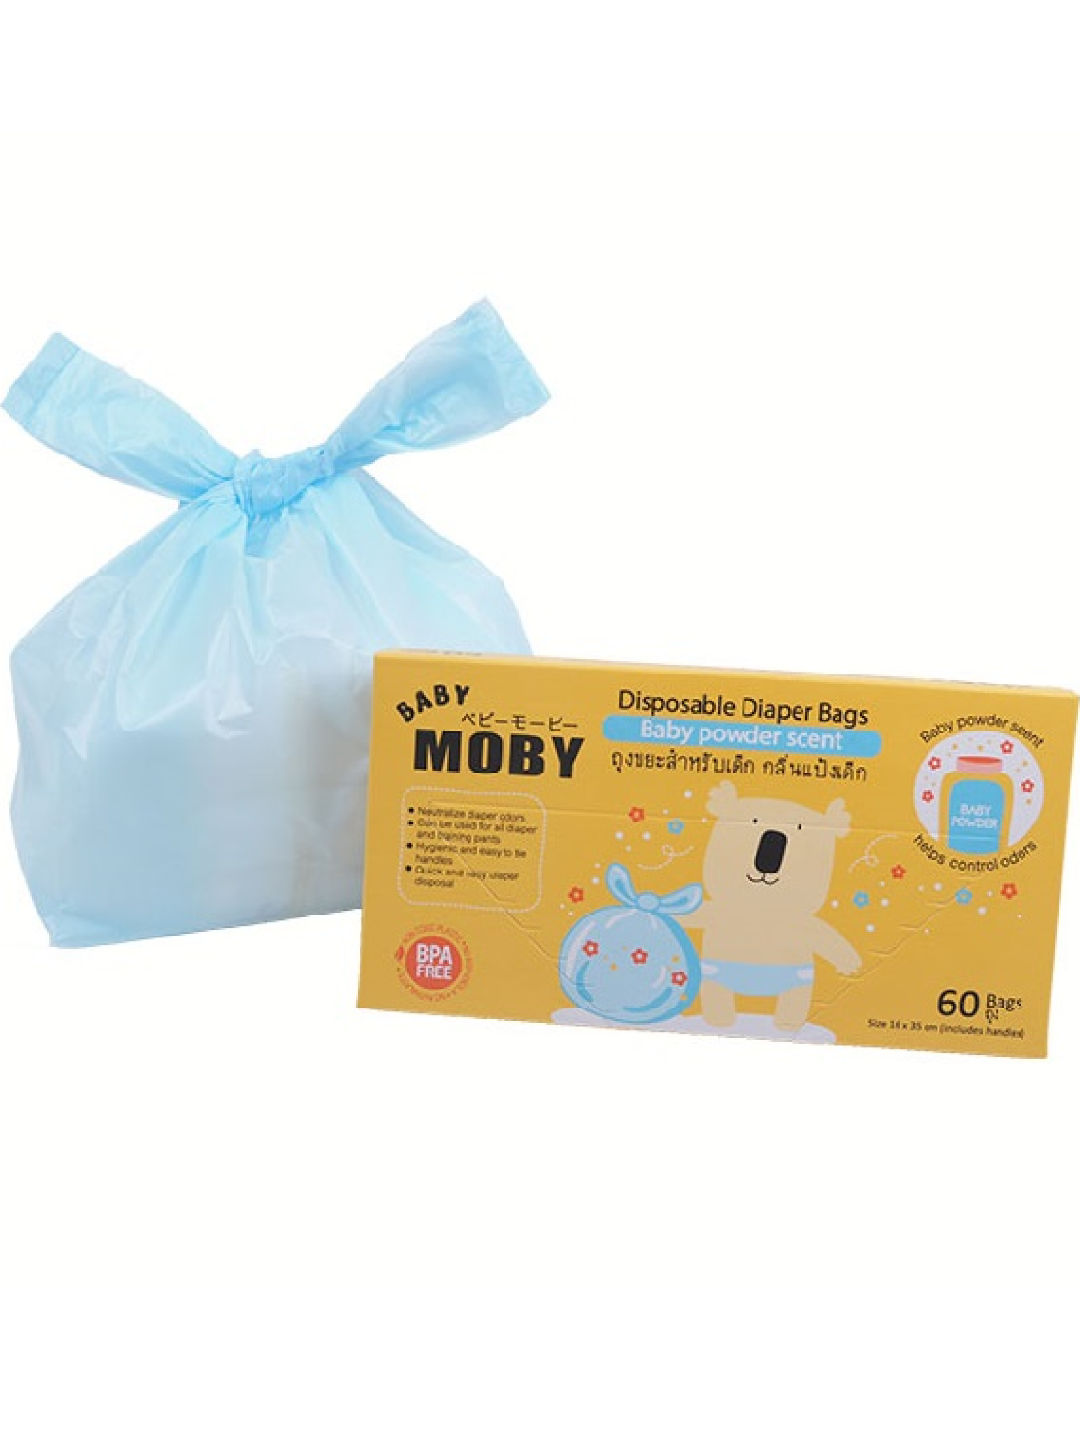 Baby Moby Disposable Diaper Bags (No Color- Image 2)